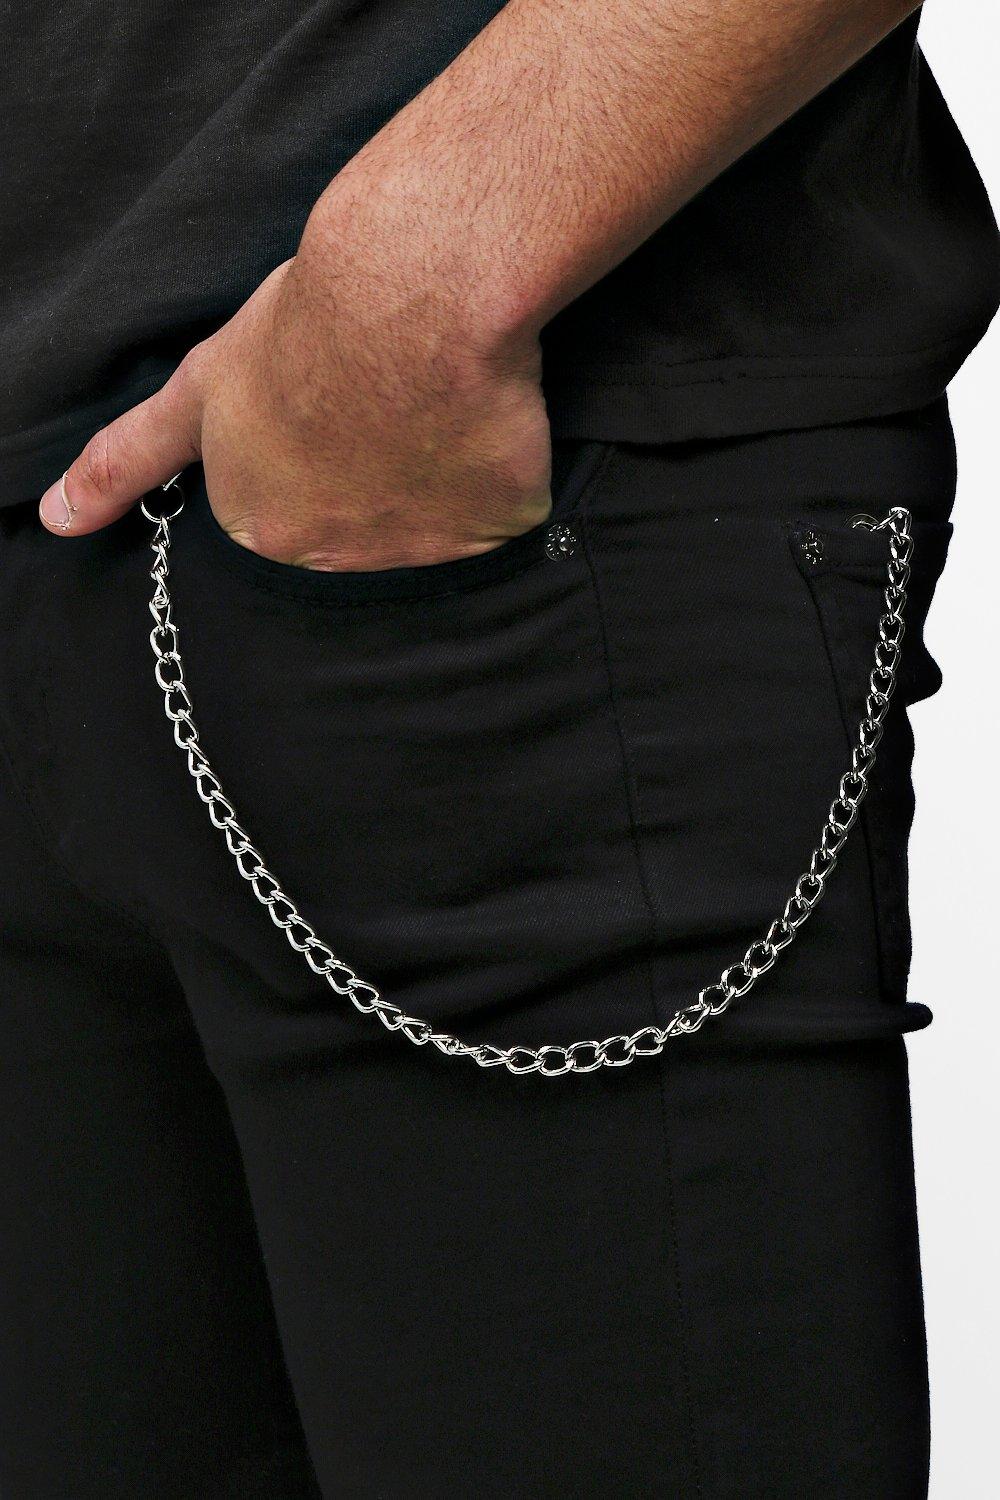 silver chain for jeans